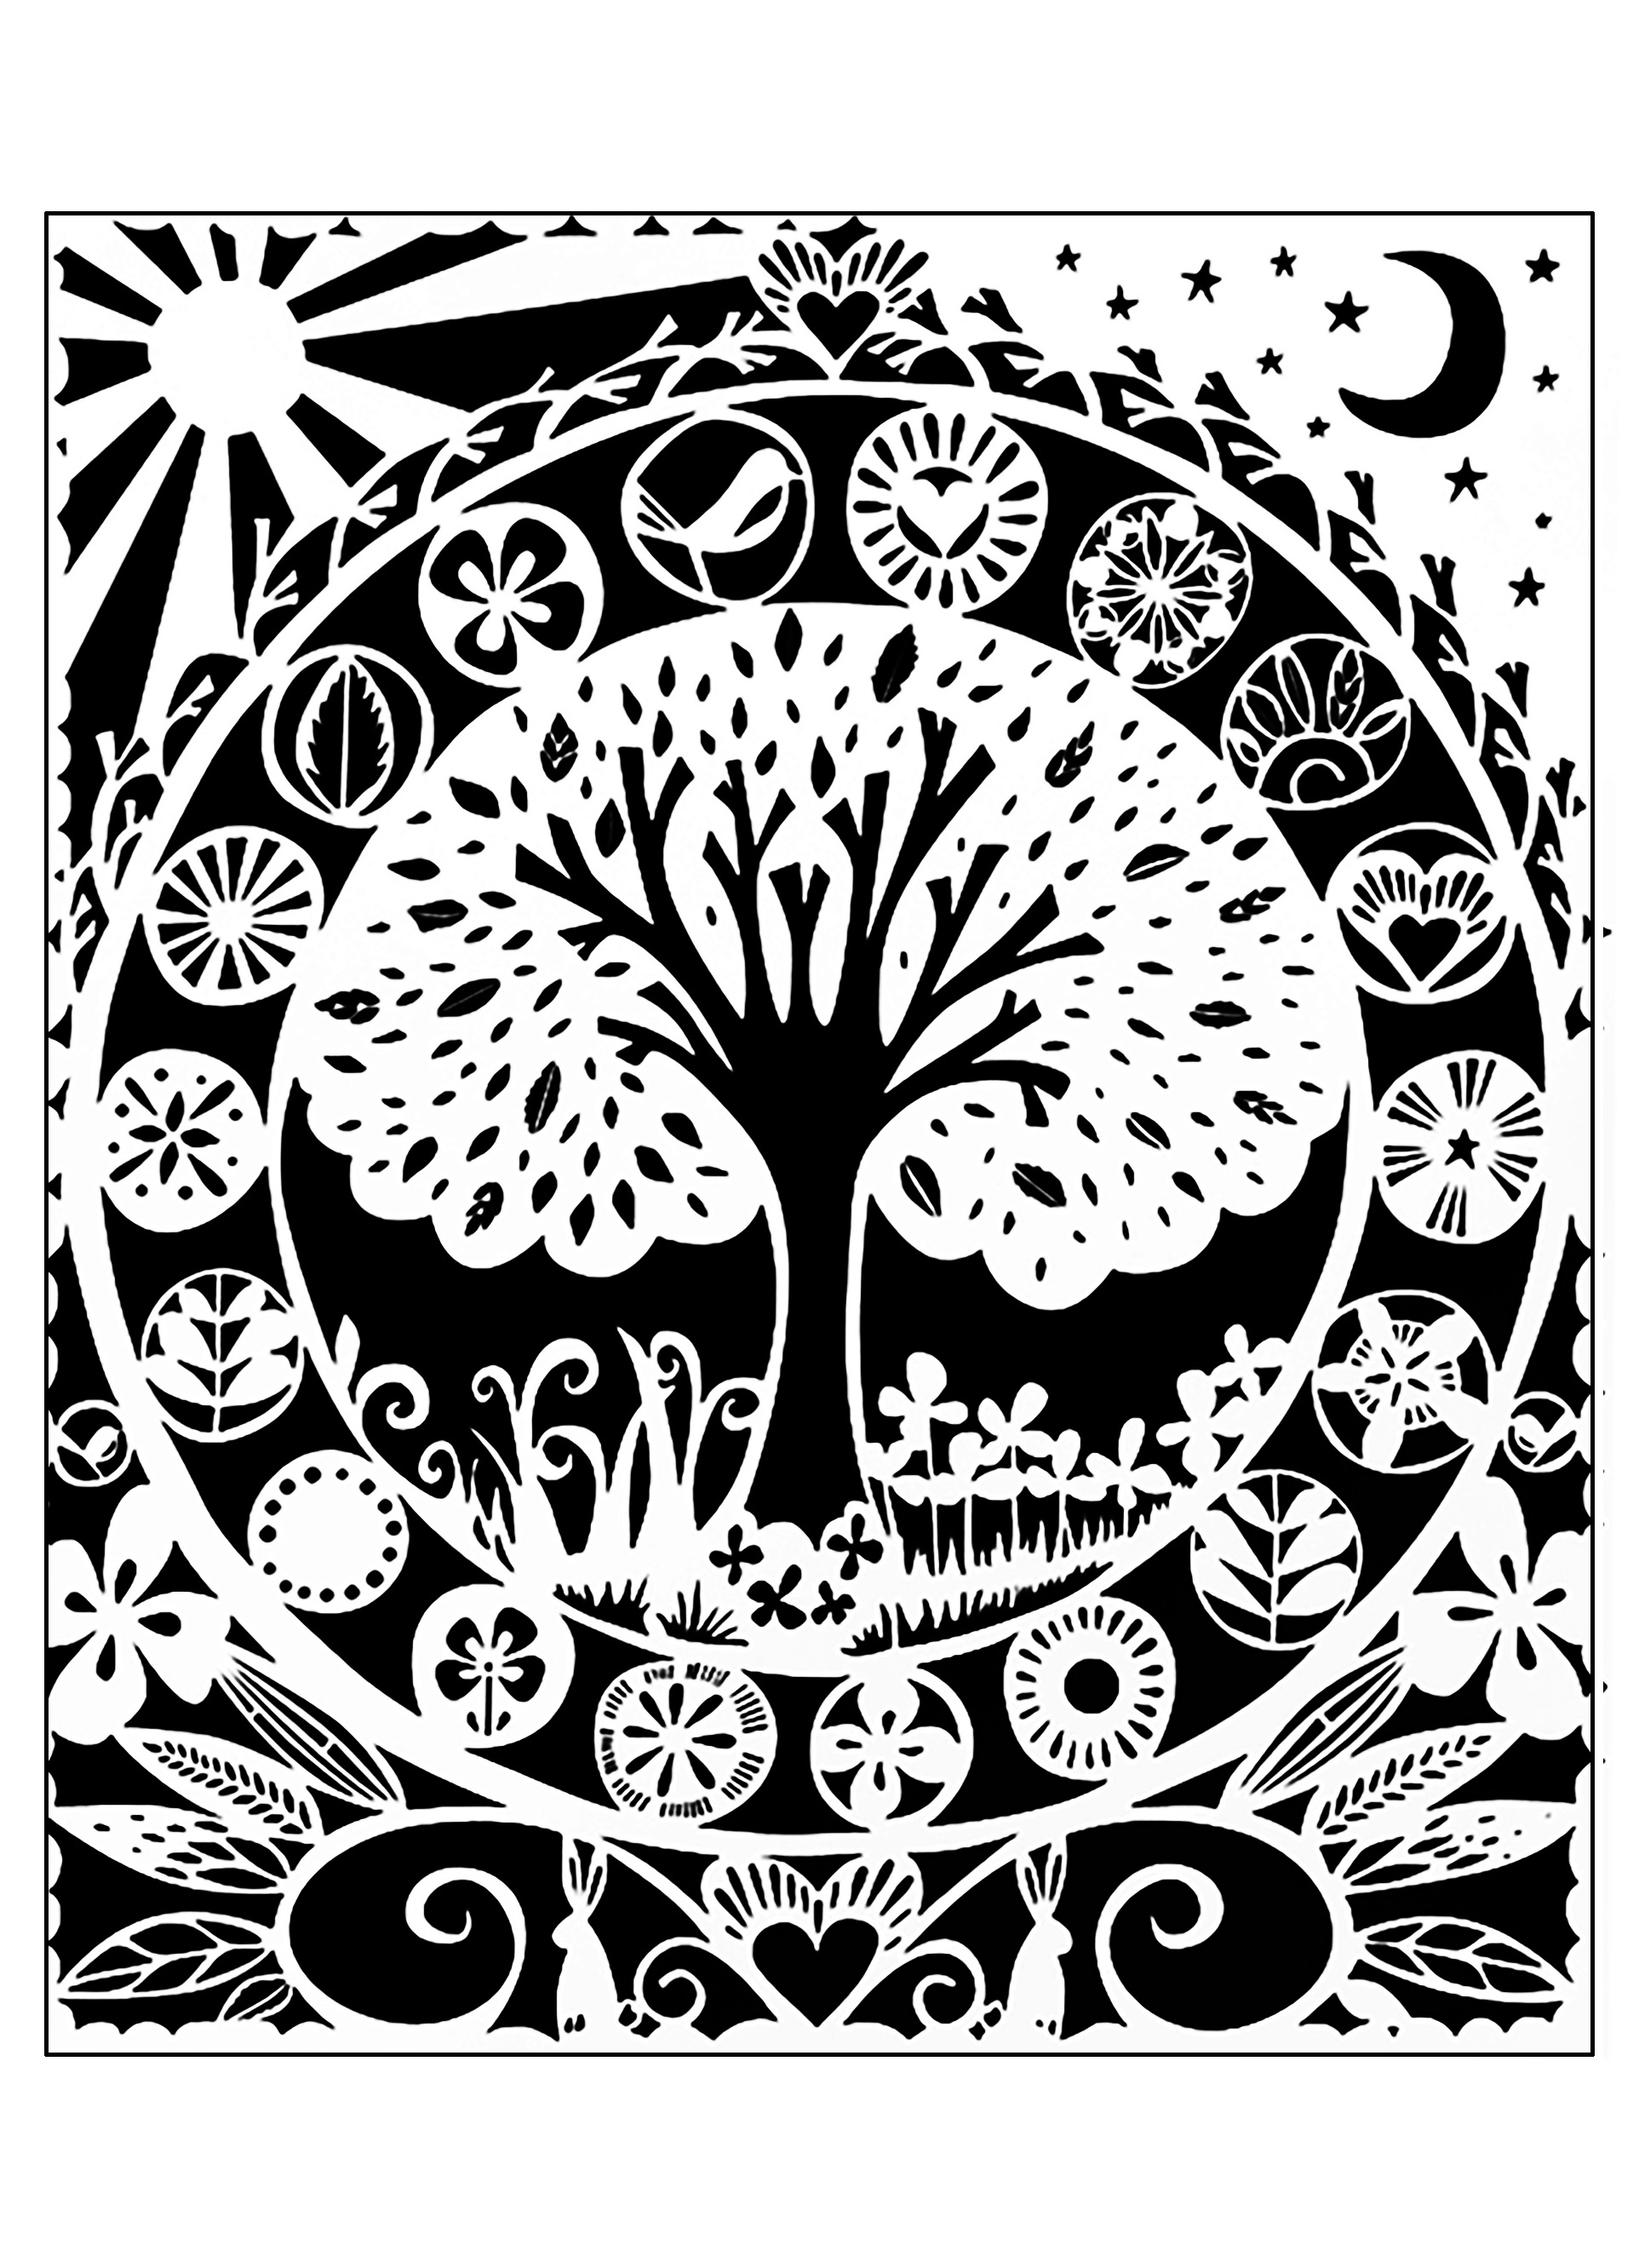 Download Tree - Coloring Pages for Adults